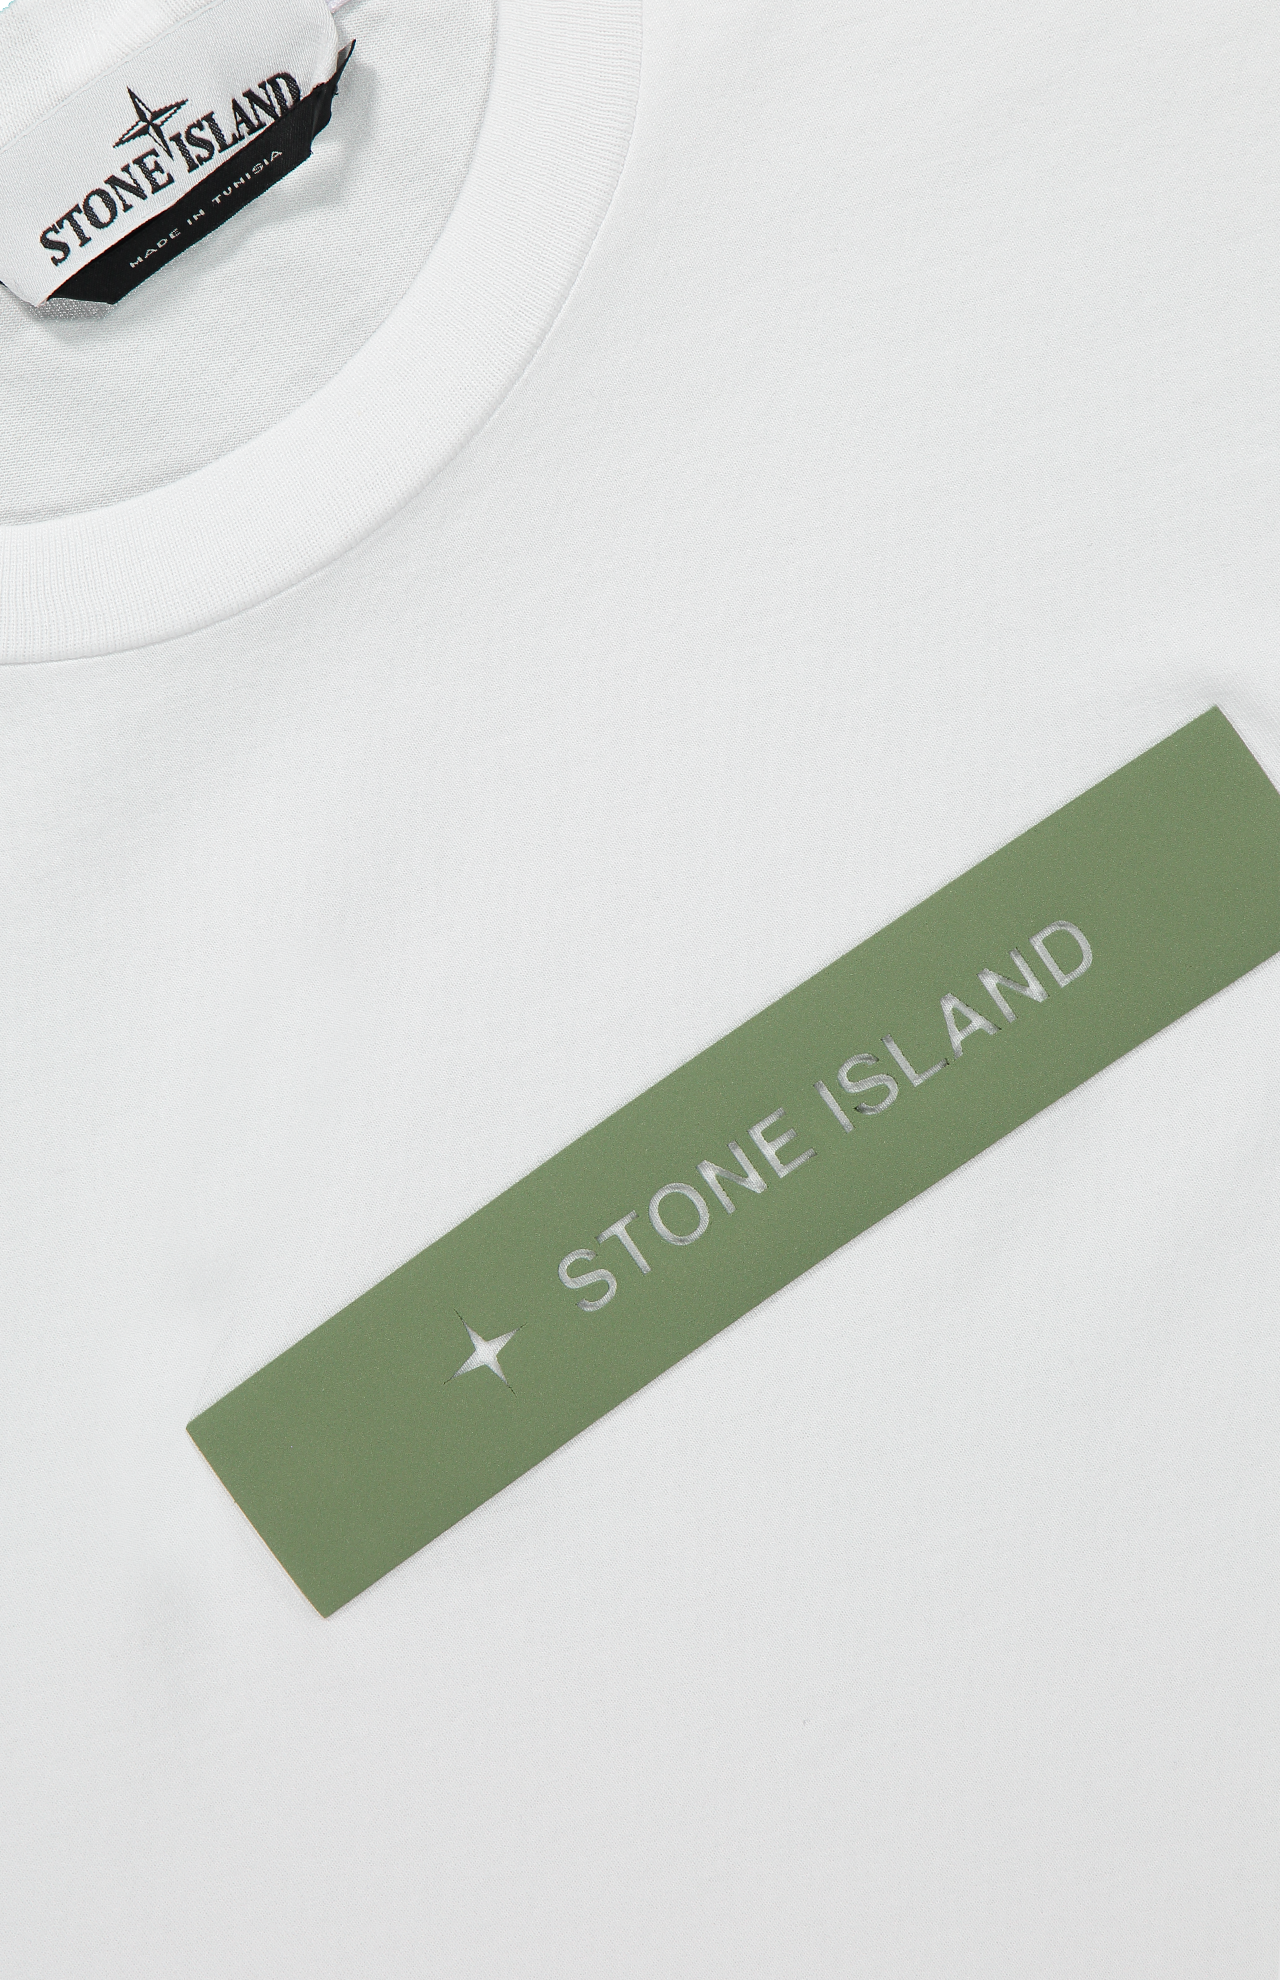 Stone Island Rectangle Front T-Shirt in White, Collar Detail Image (7055698526323)